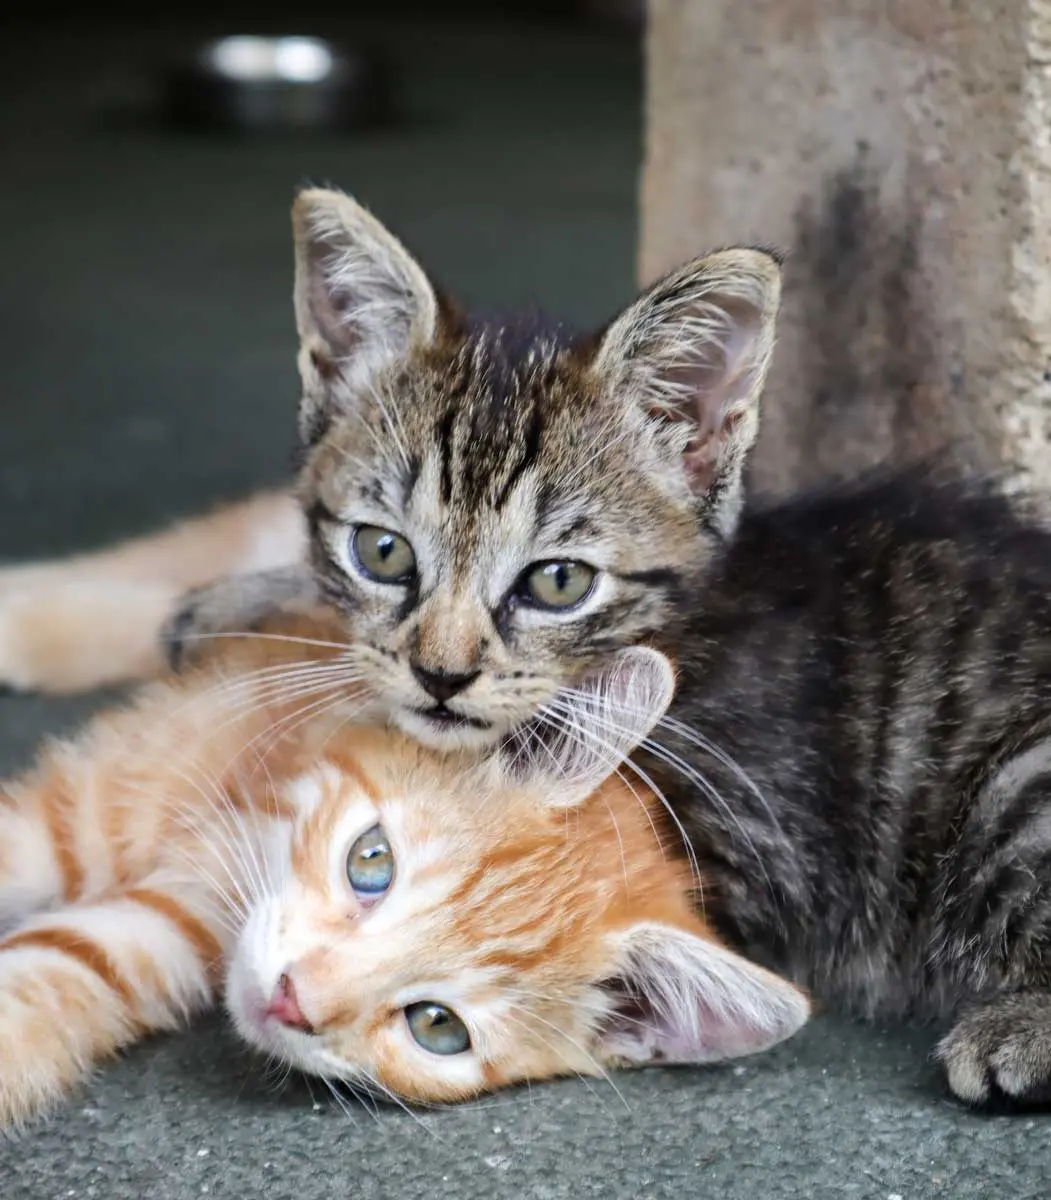 two kittens together